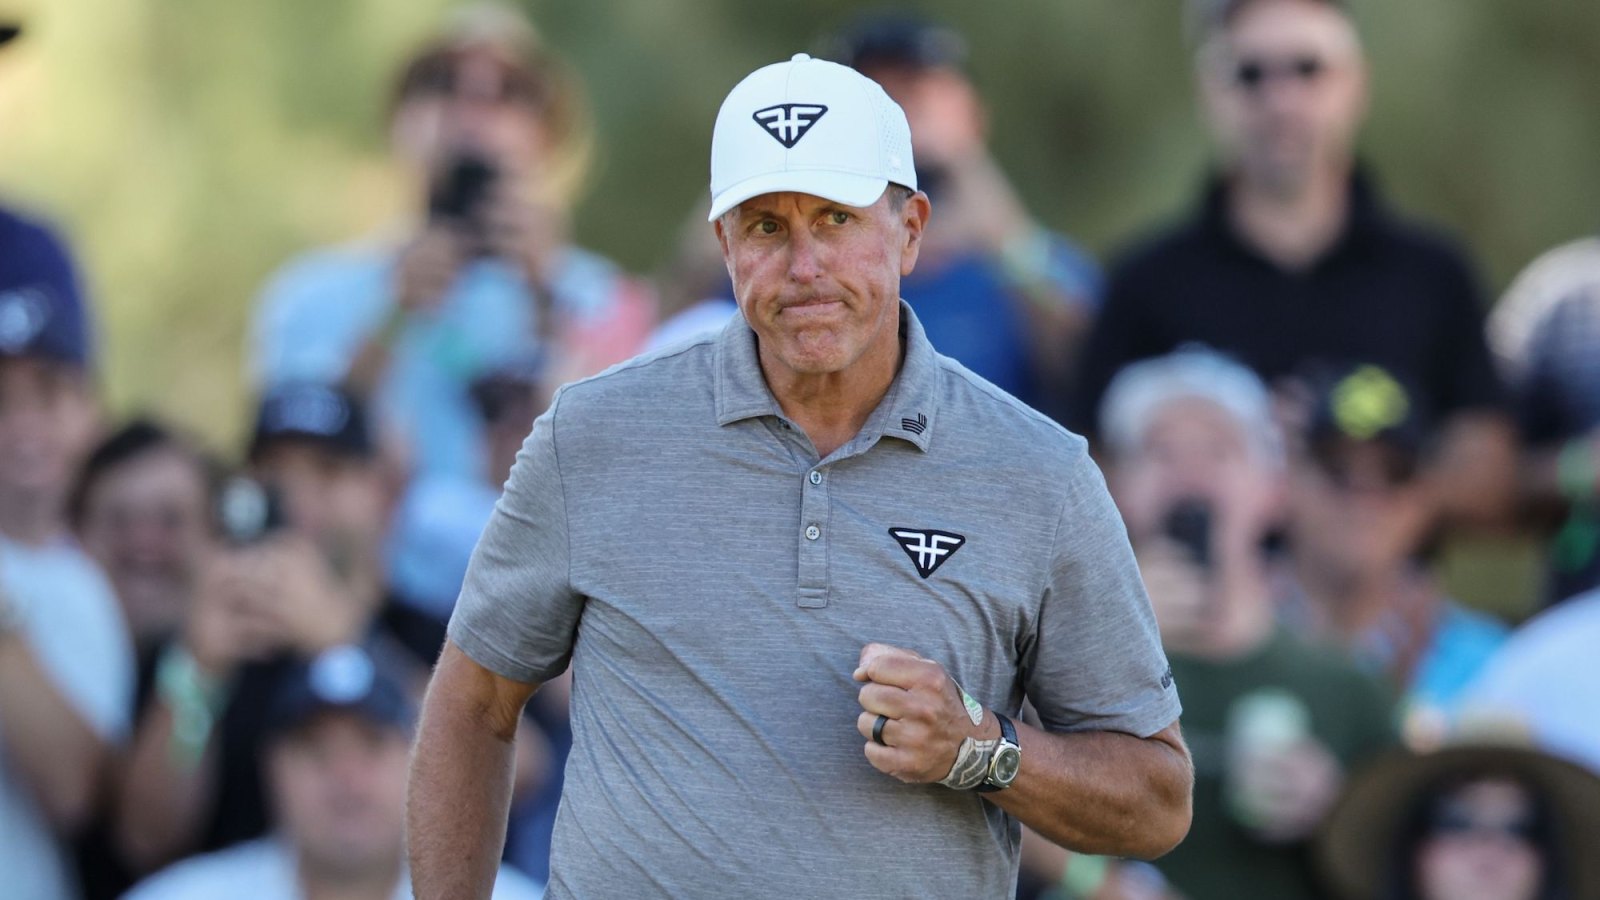 Pro Golfer Phil Mickelson Allegedly Bet More Than -1 Billion on Sports Wagers